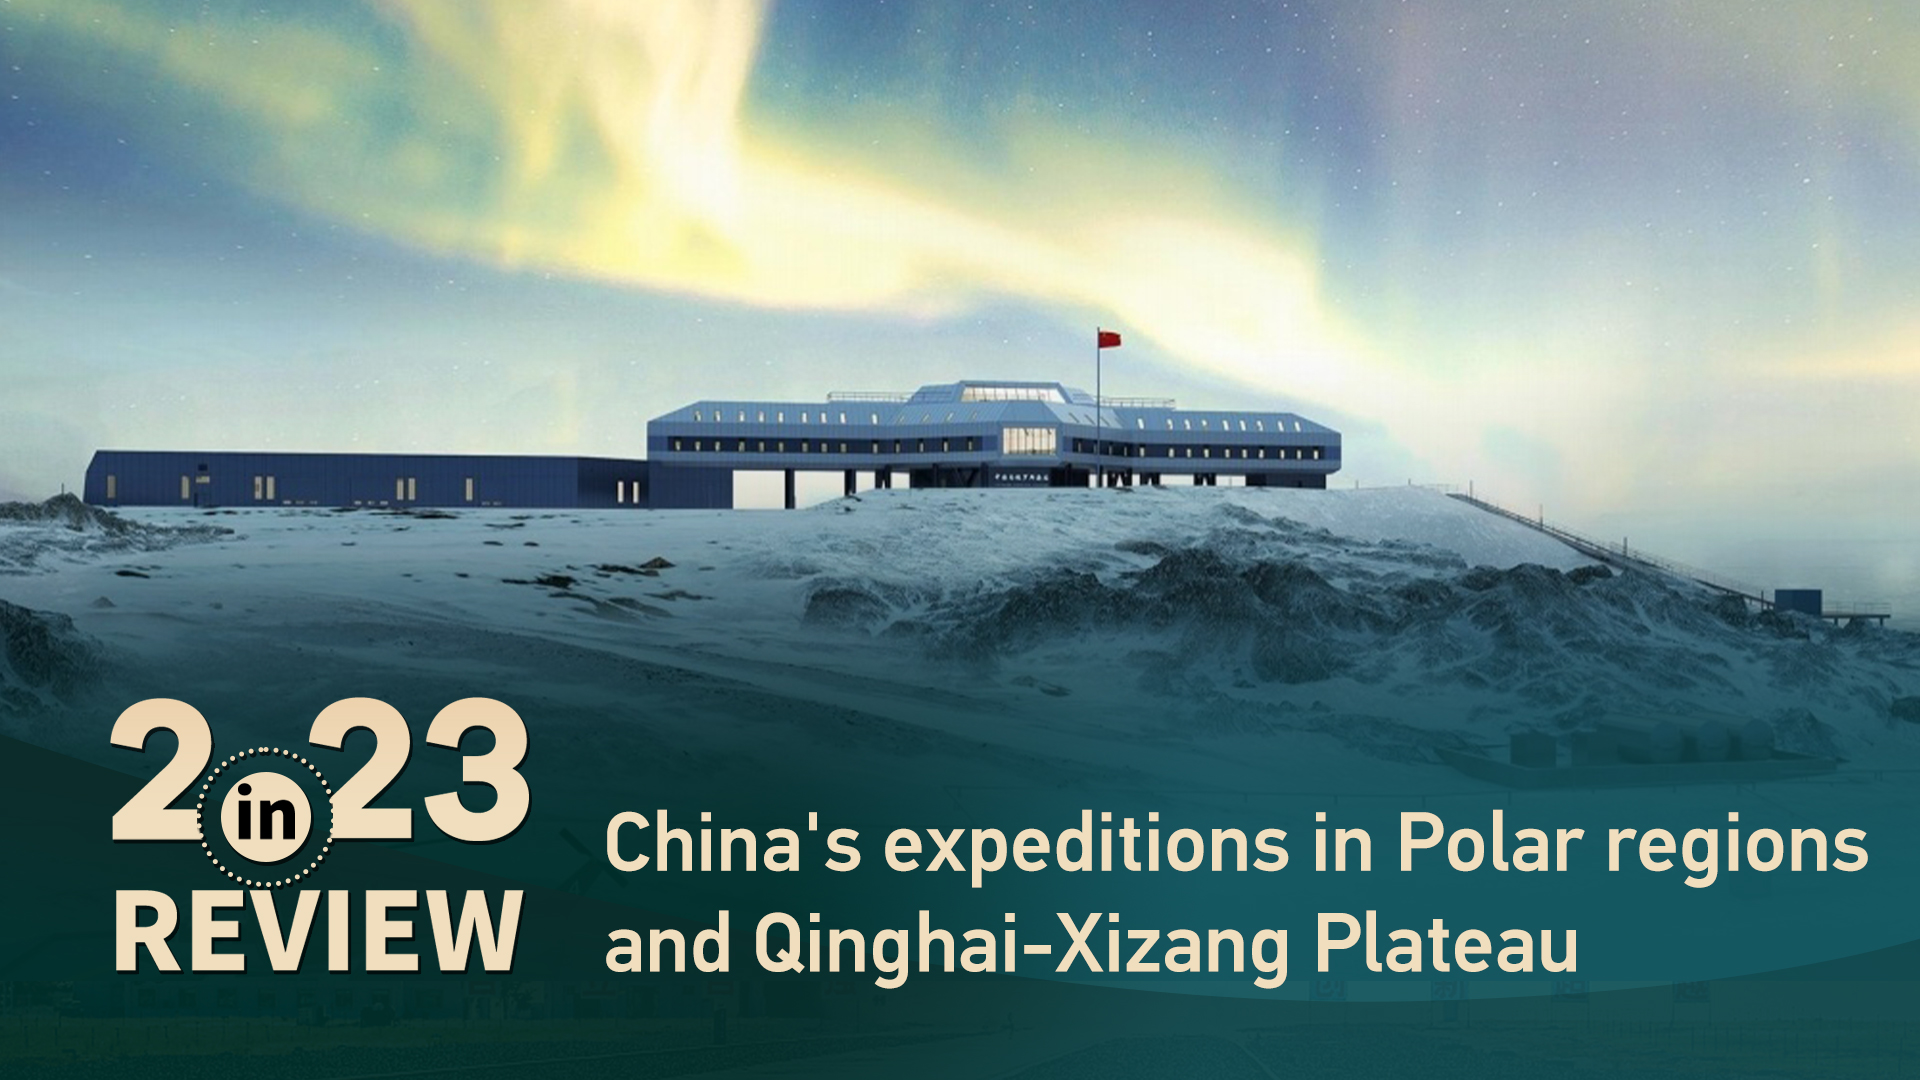 2023 in review: China's expeditions in Polar regions and Qinghai-Xizang Plateau